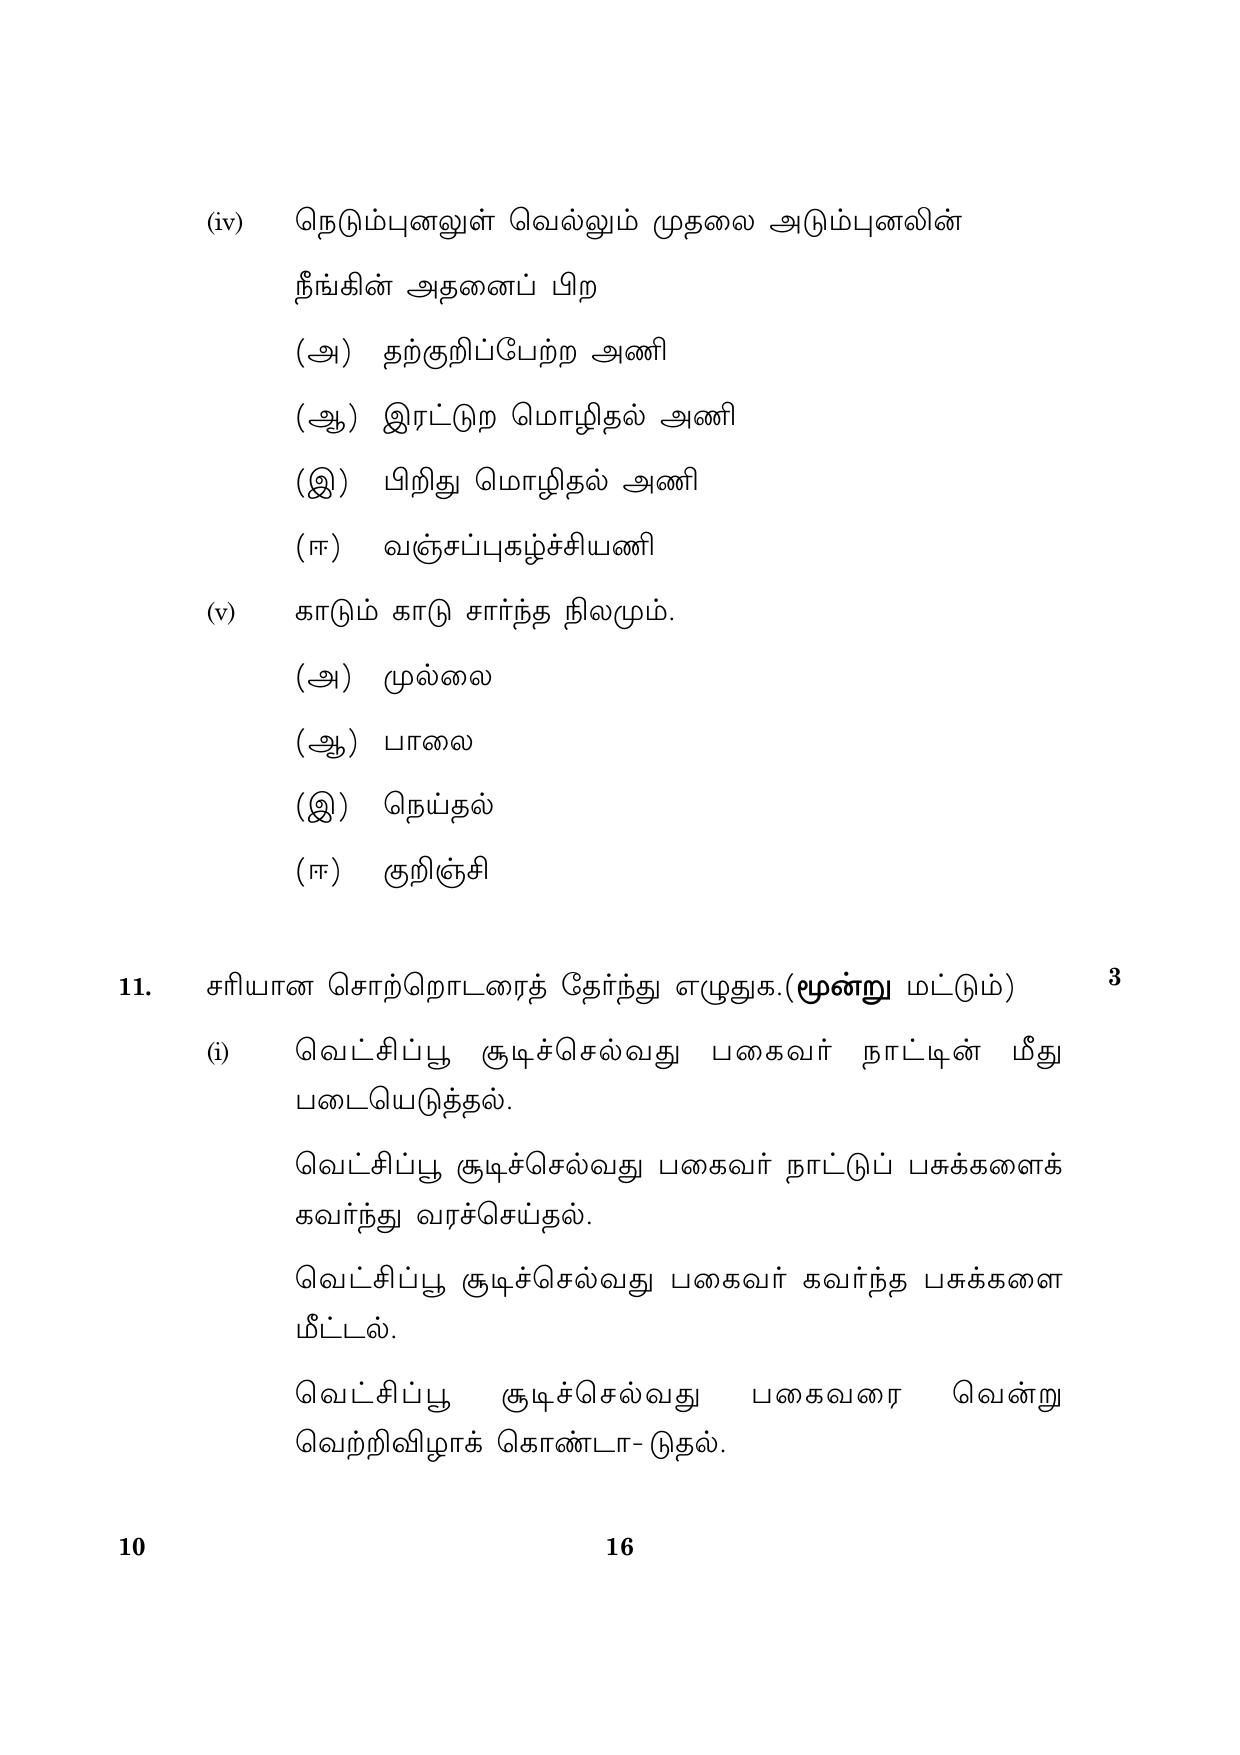 CBSE Class 10 010 Tamil 2016 Question Paper - Page 16